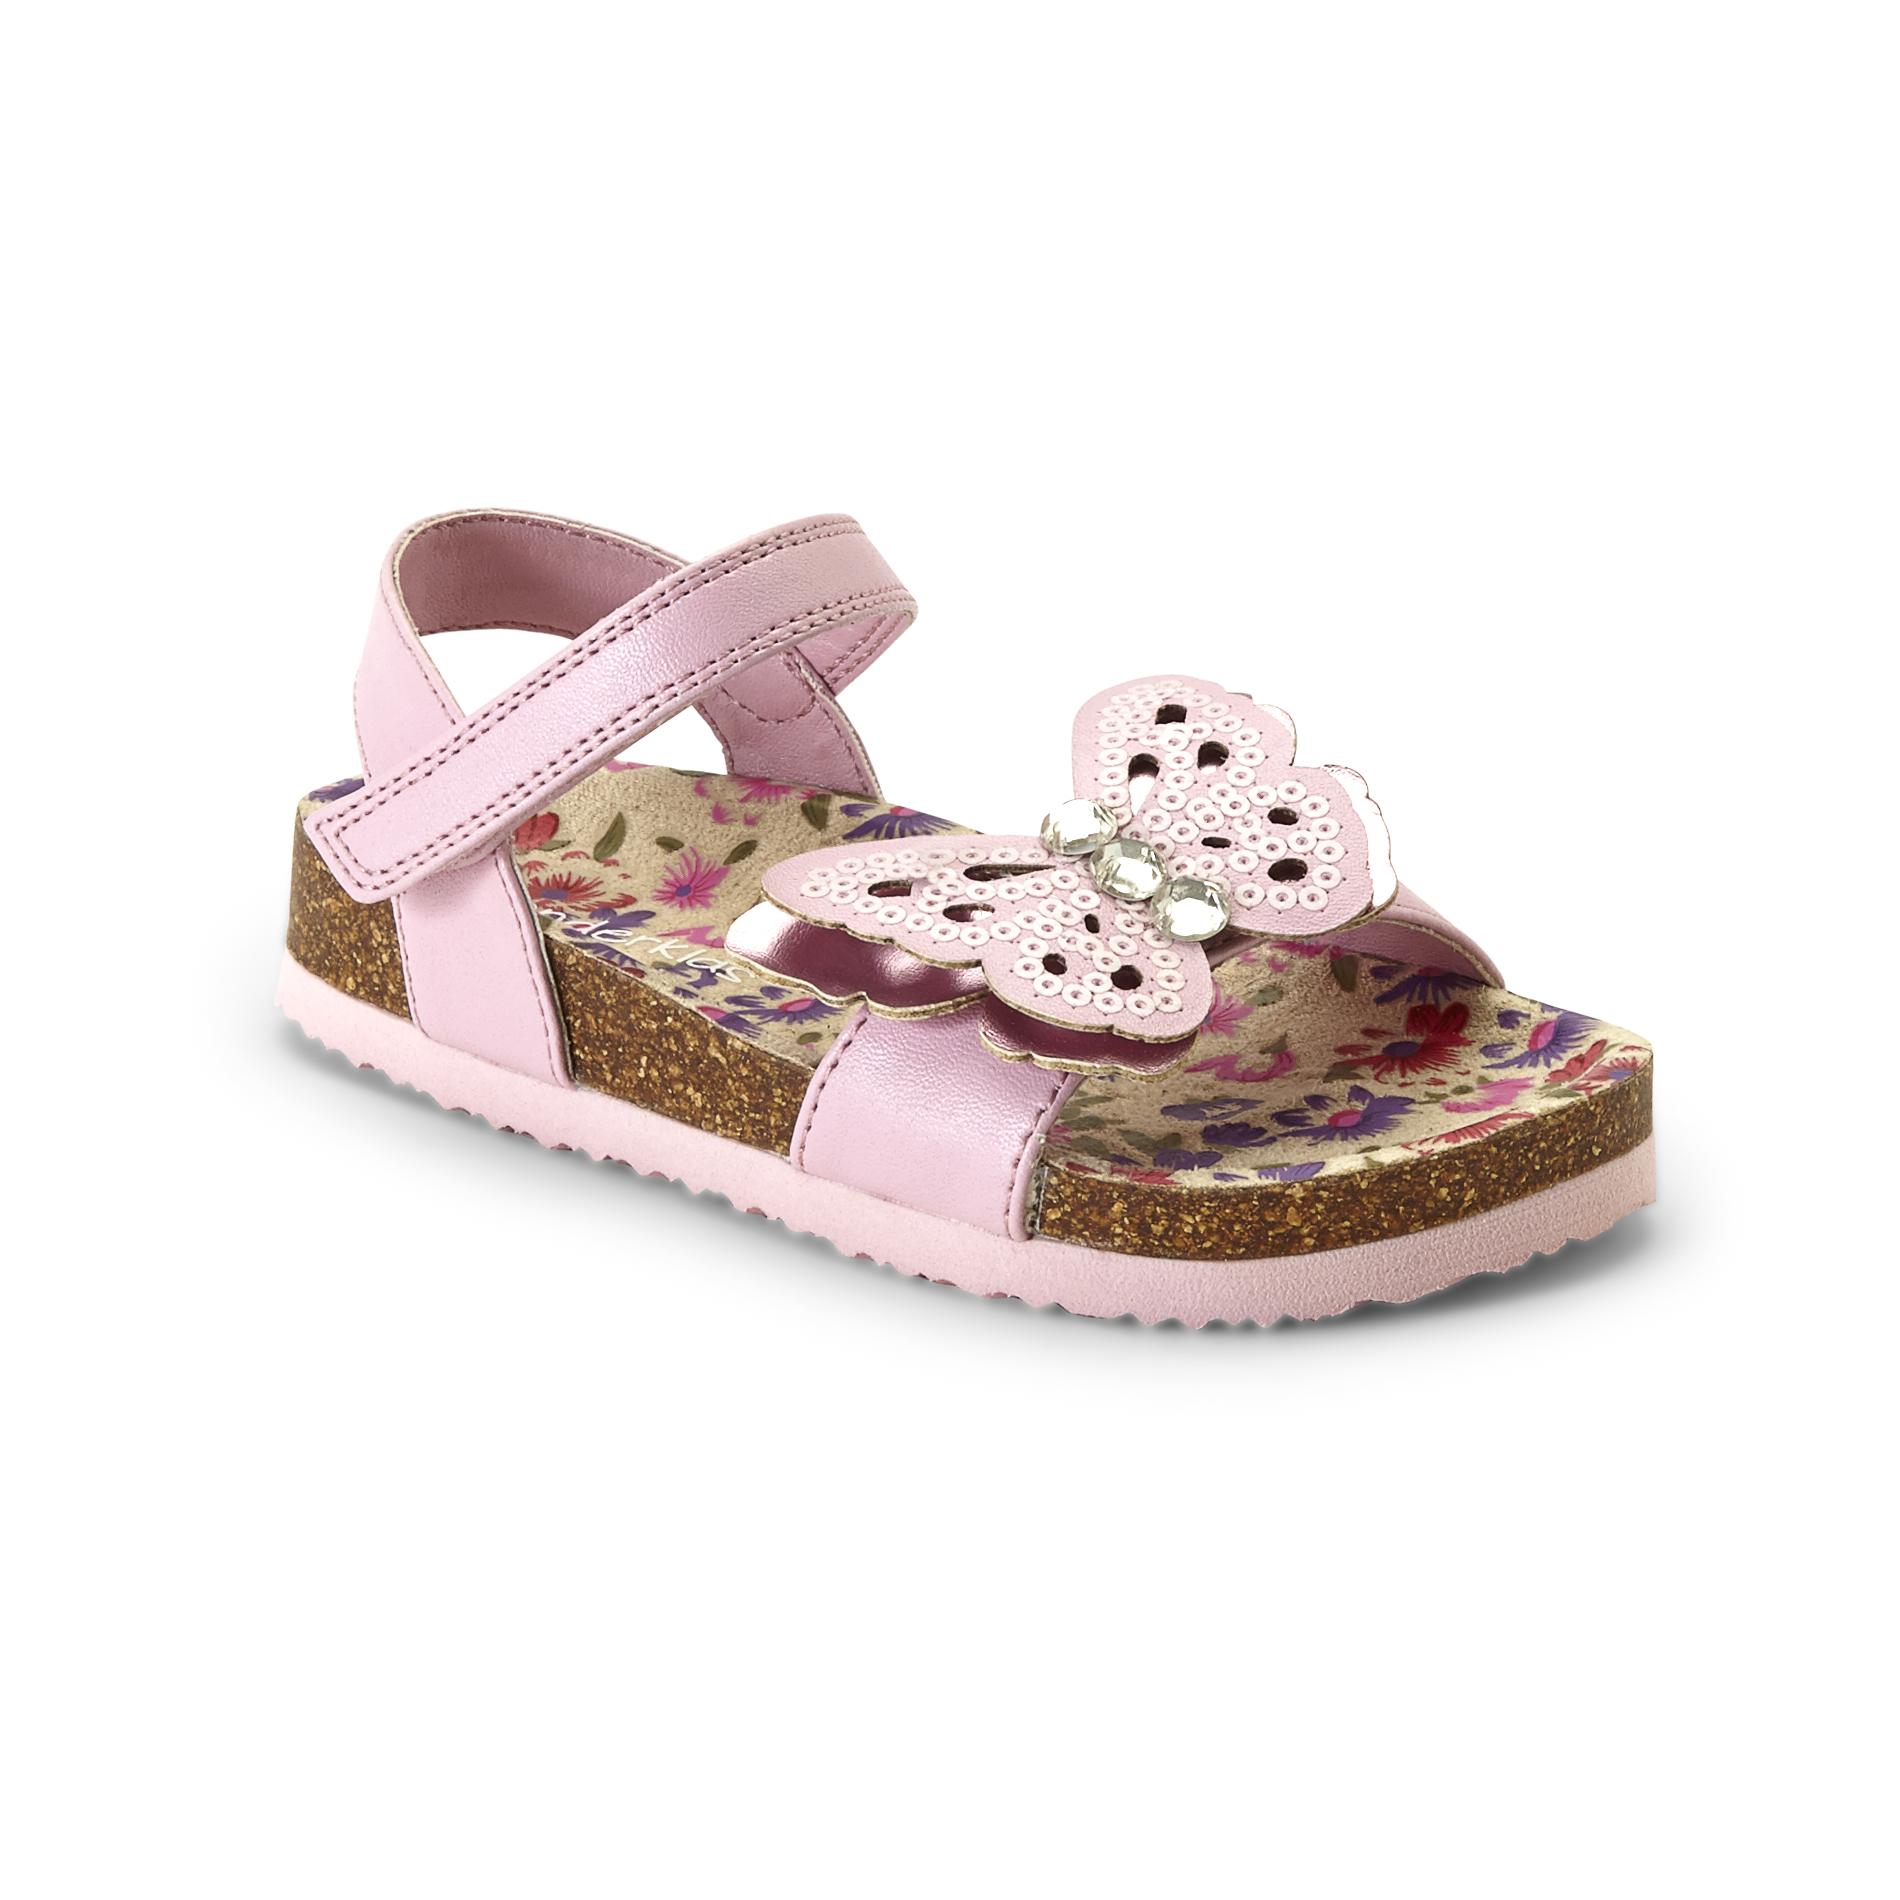 WonderKids Toddler Girl's Corky Butterfly Pink Synthetic Leather Sandal